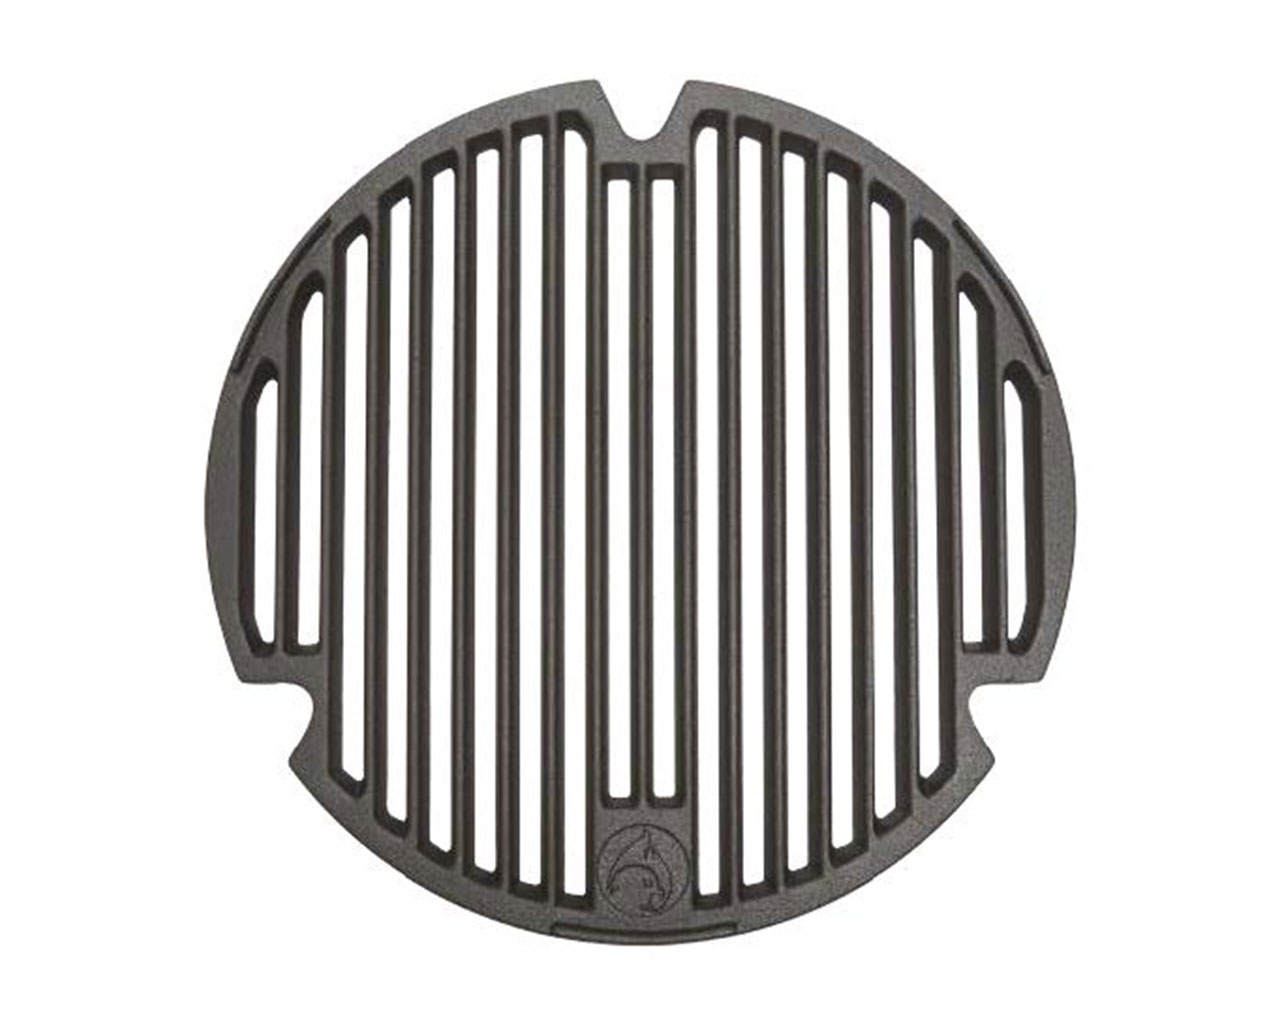 Firehawk Cast Iron Grill Sear 56cm (22"), , hi-res image number null